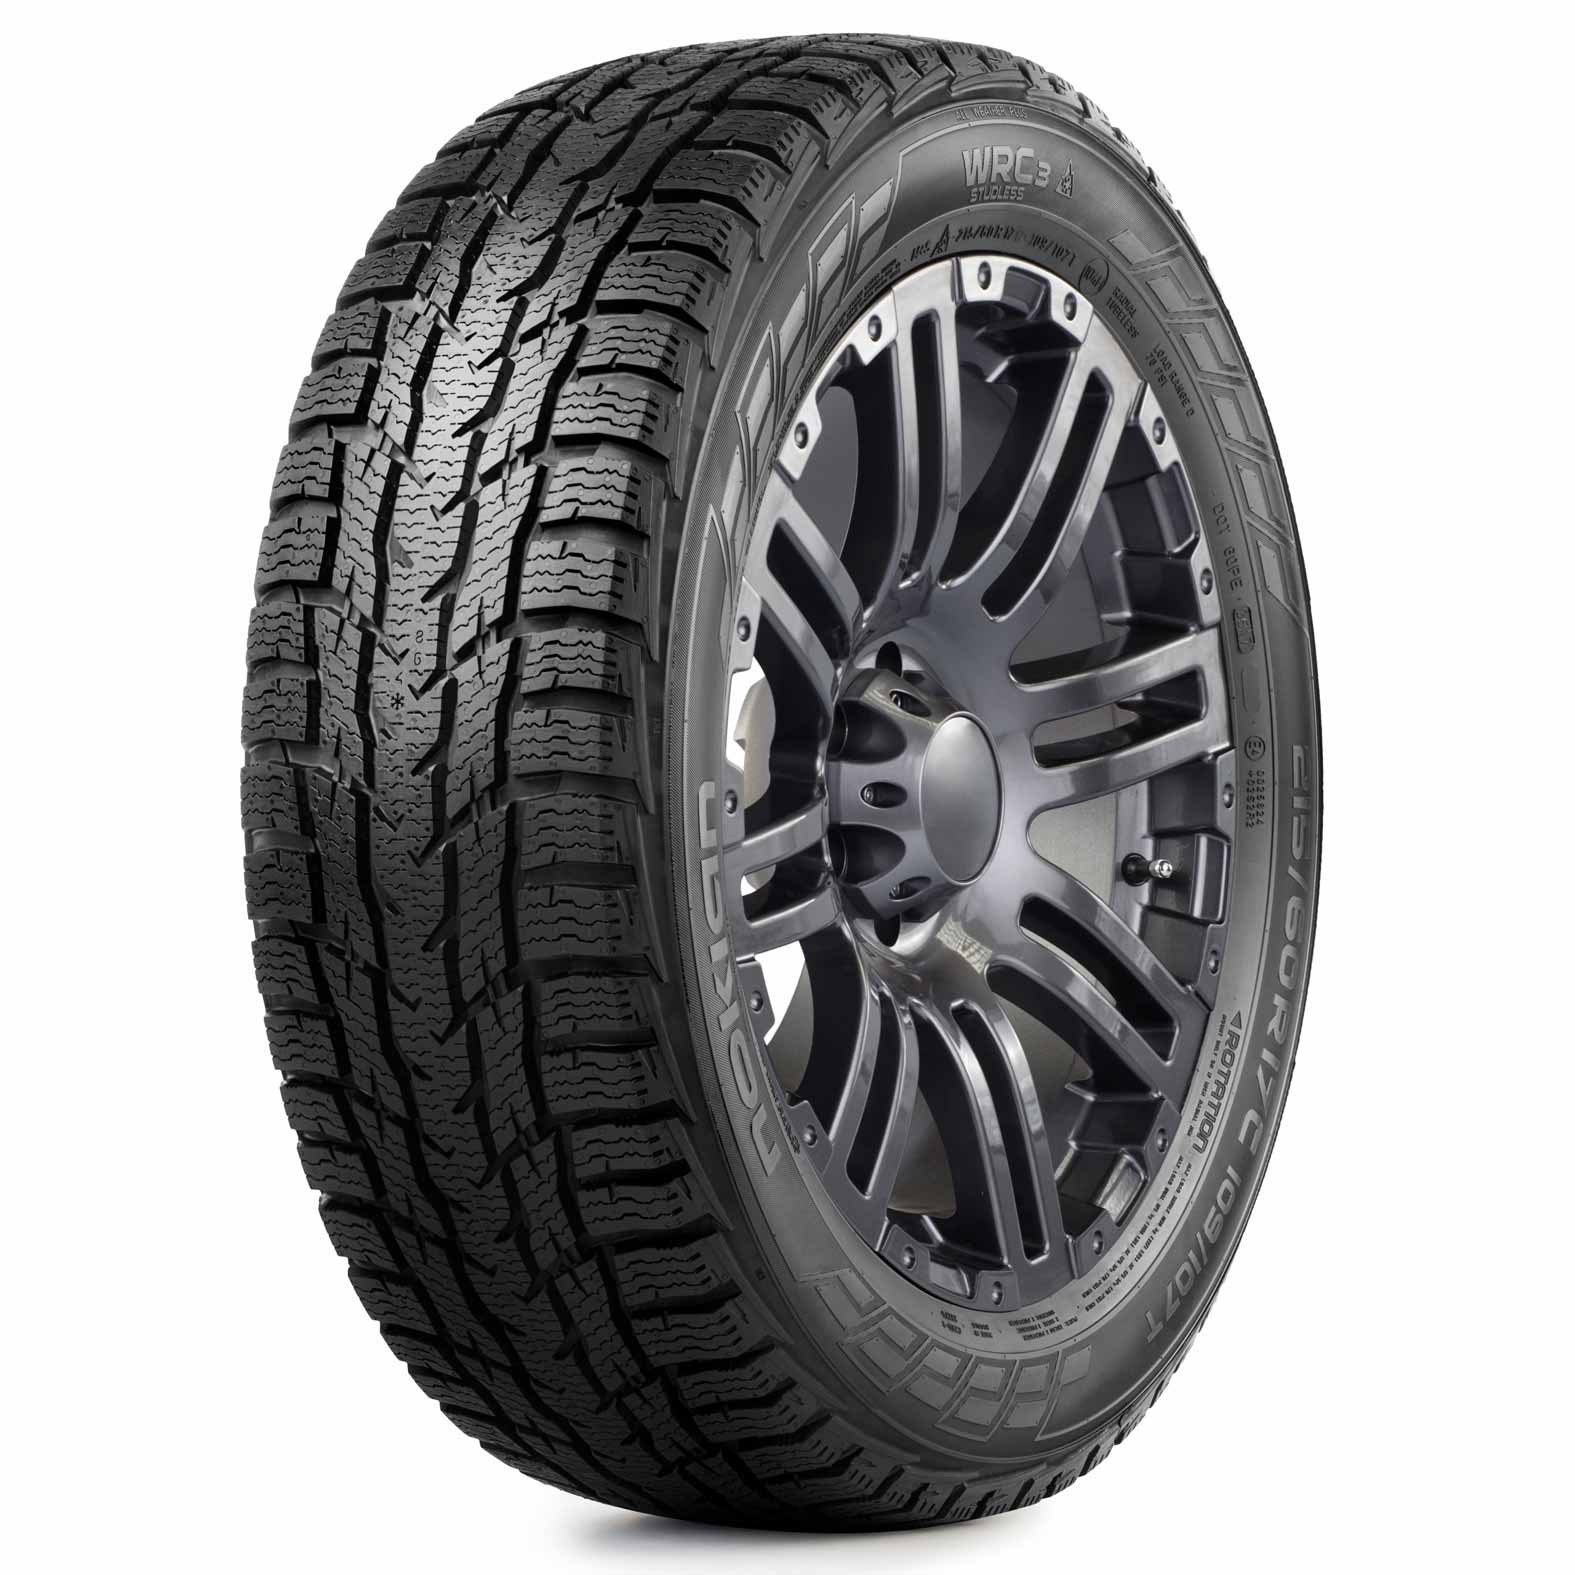 Nokian WR C3 All-Weather Tires Kal for Tire 